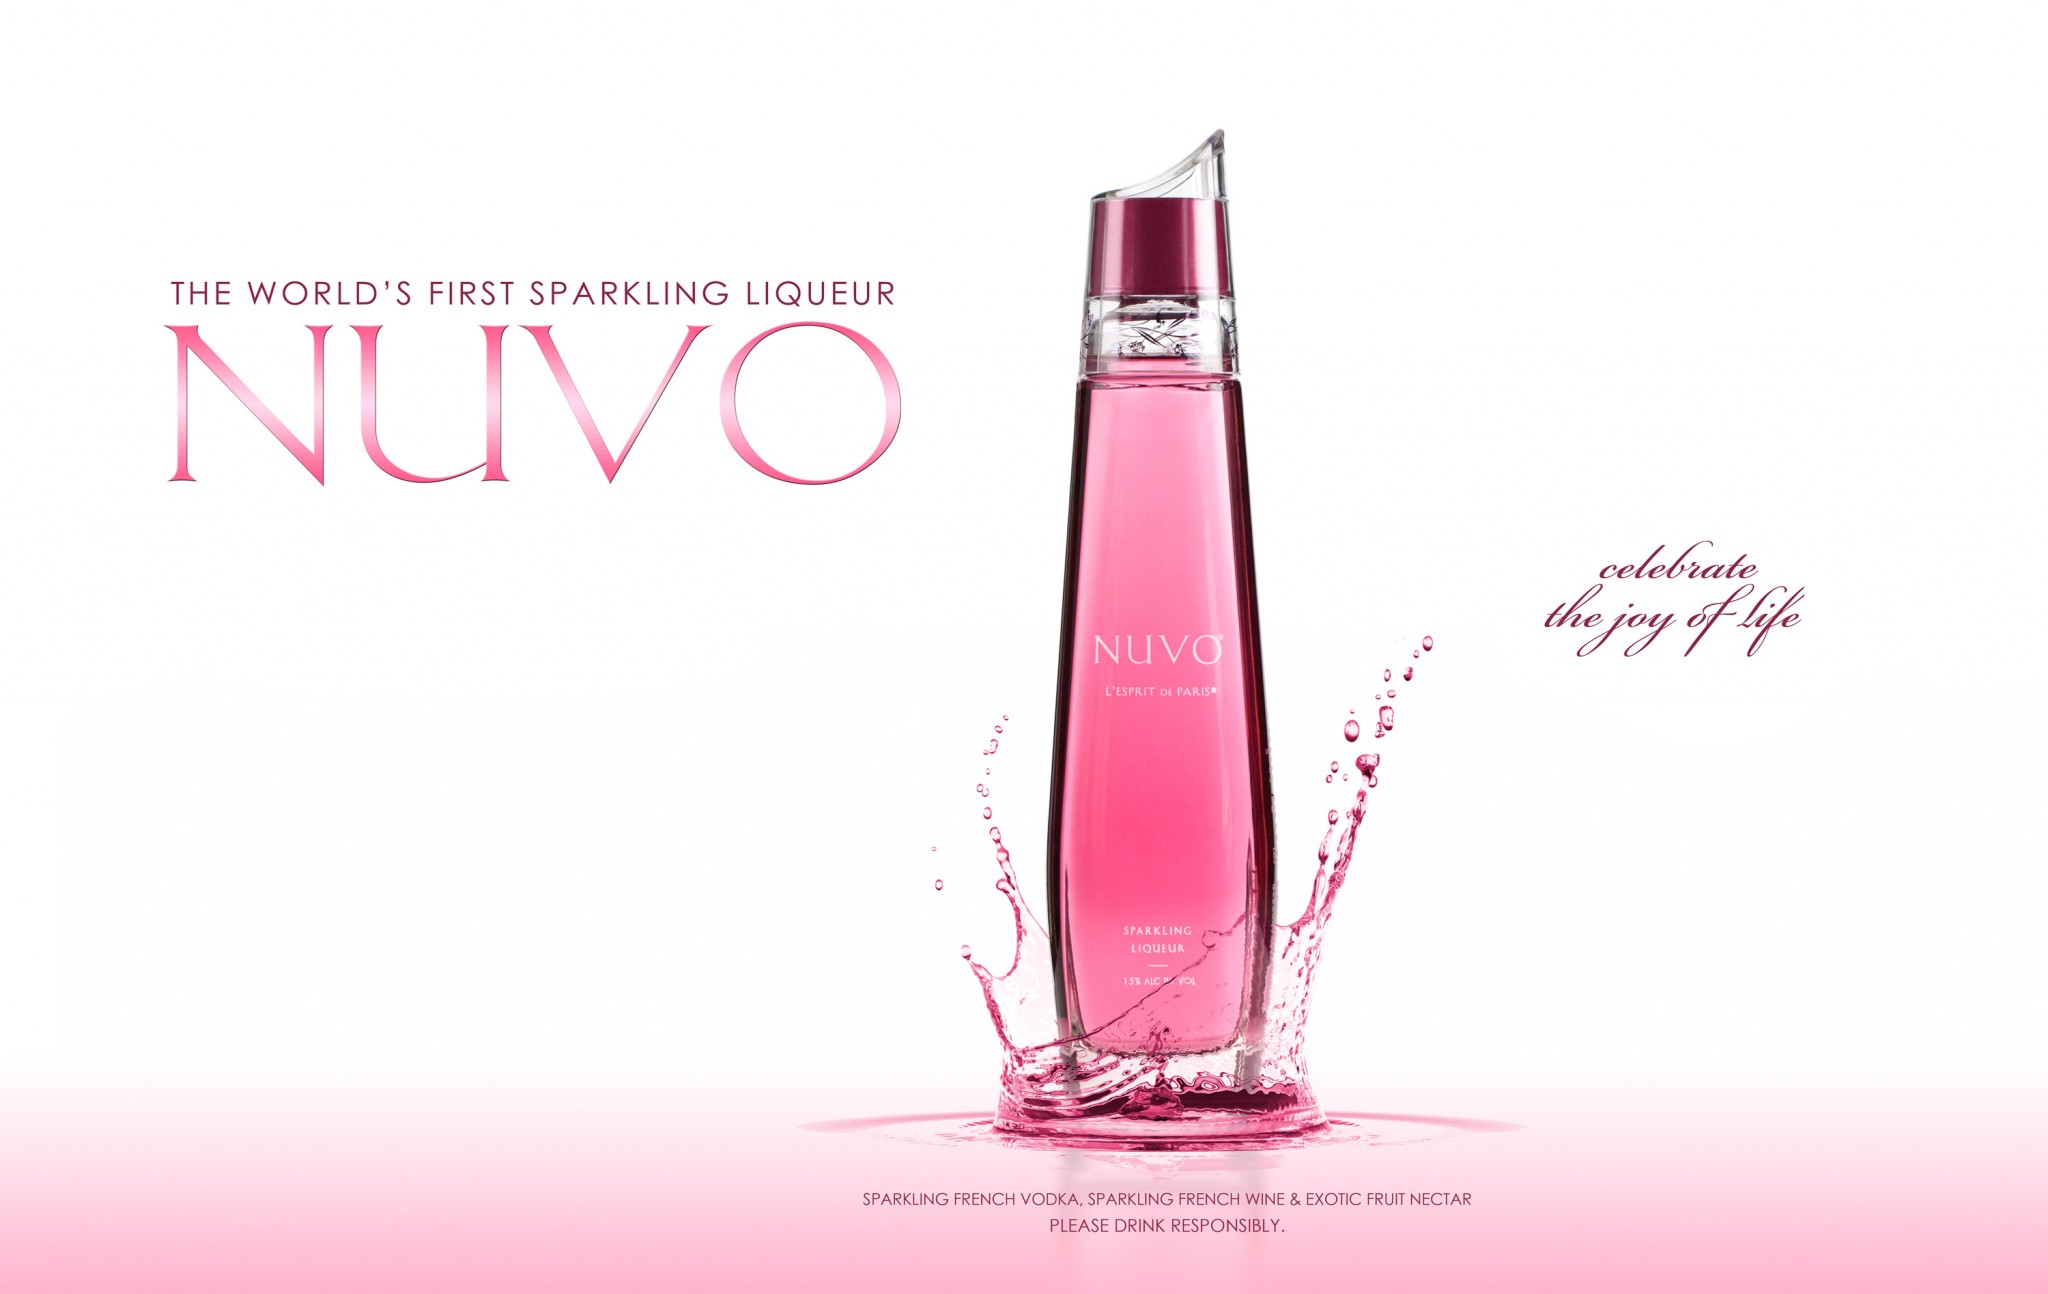 Nuvo Advertising photographed by Nick Saglimbeni for WMB 3D Magazine